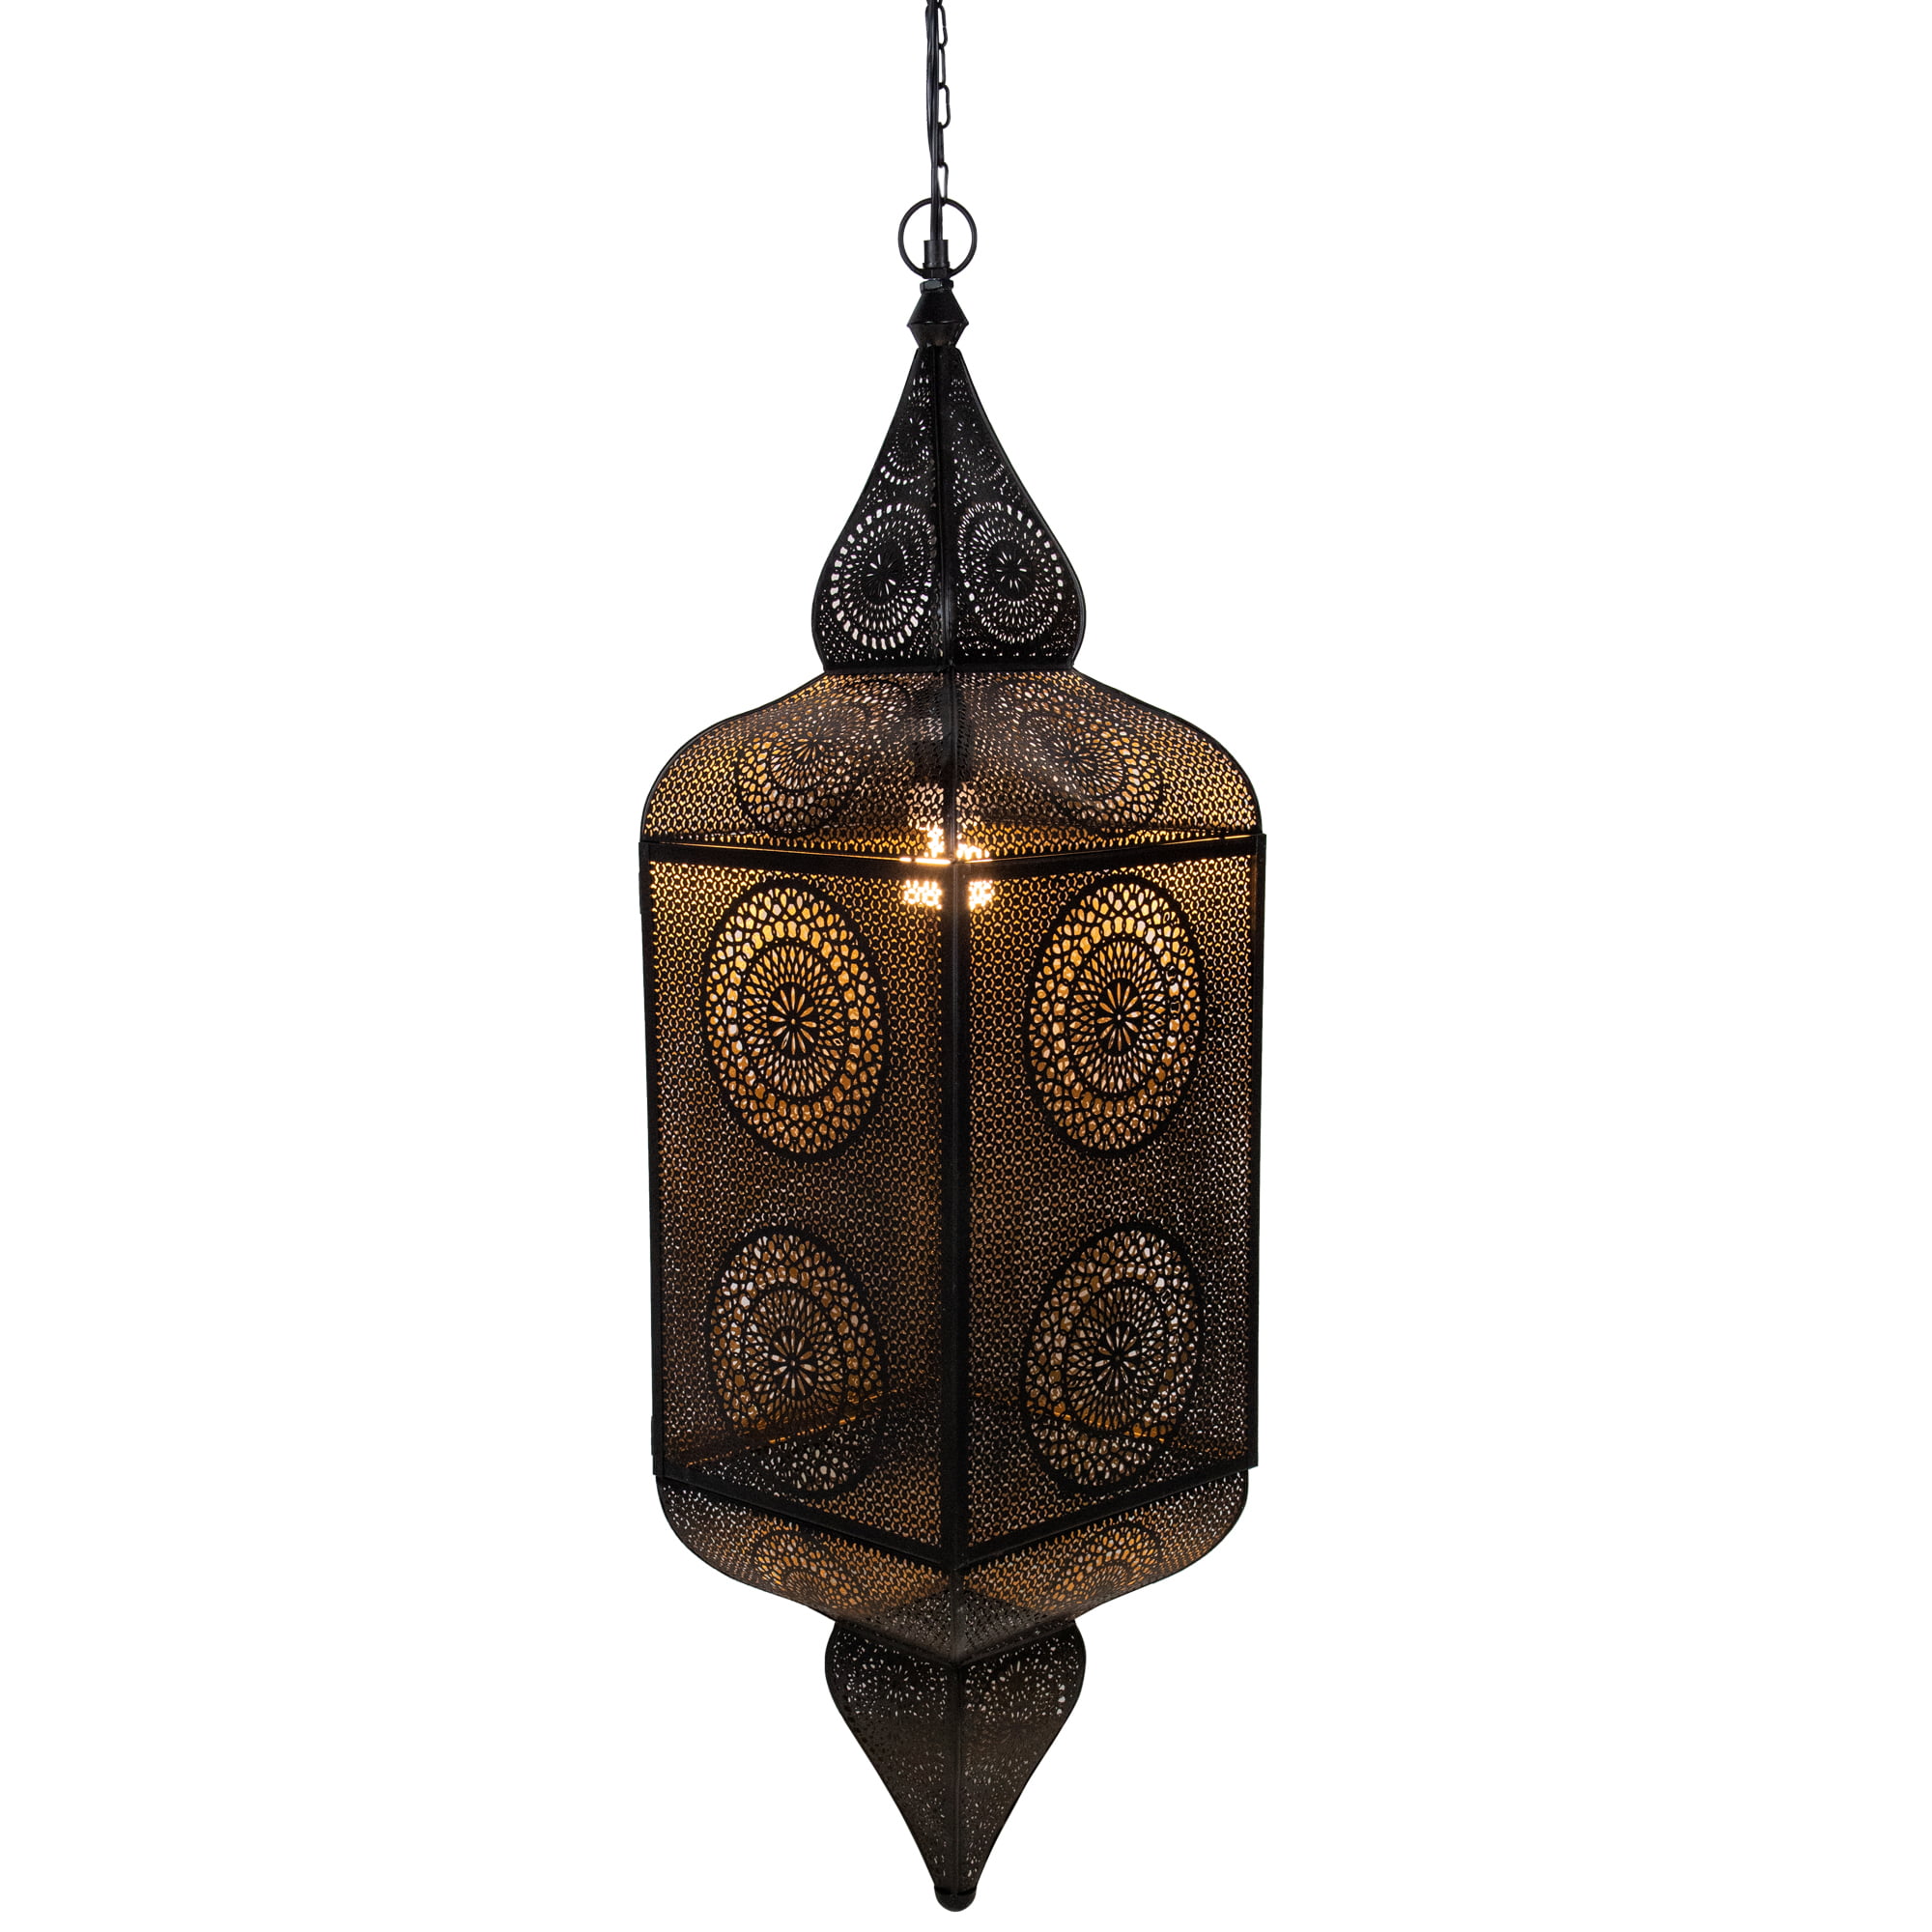 Antique Decor Golden Hanging Lamps Moroccan Ceiling Lights Home Lantern Gifts 